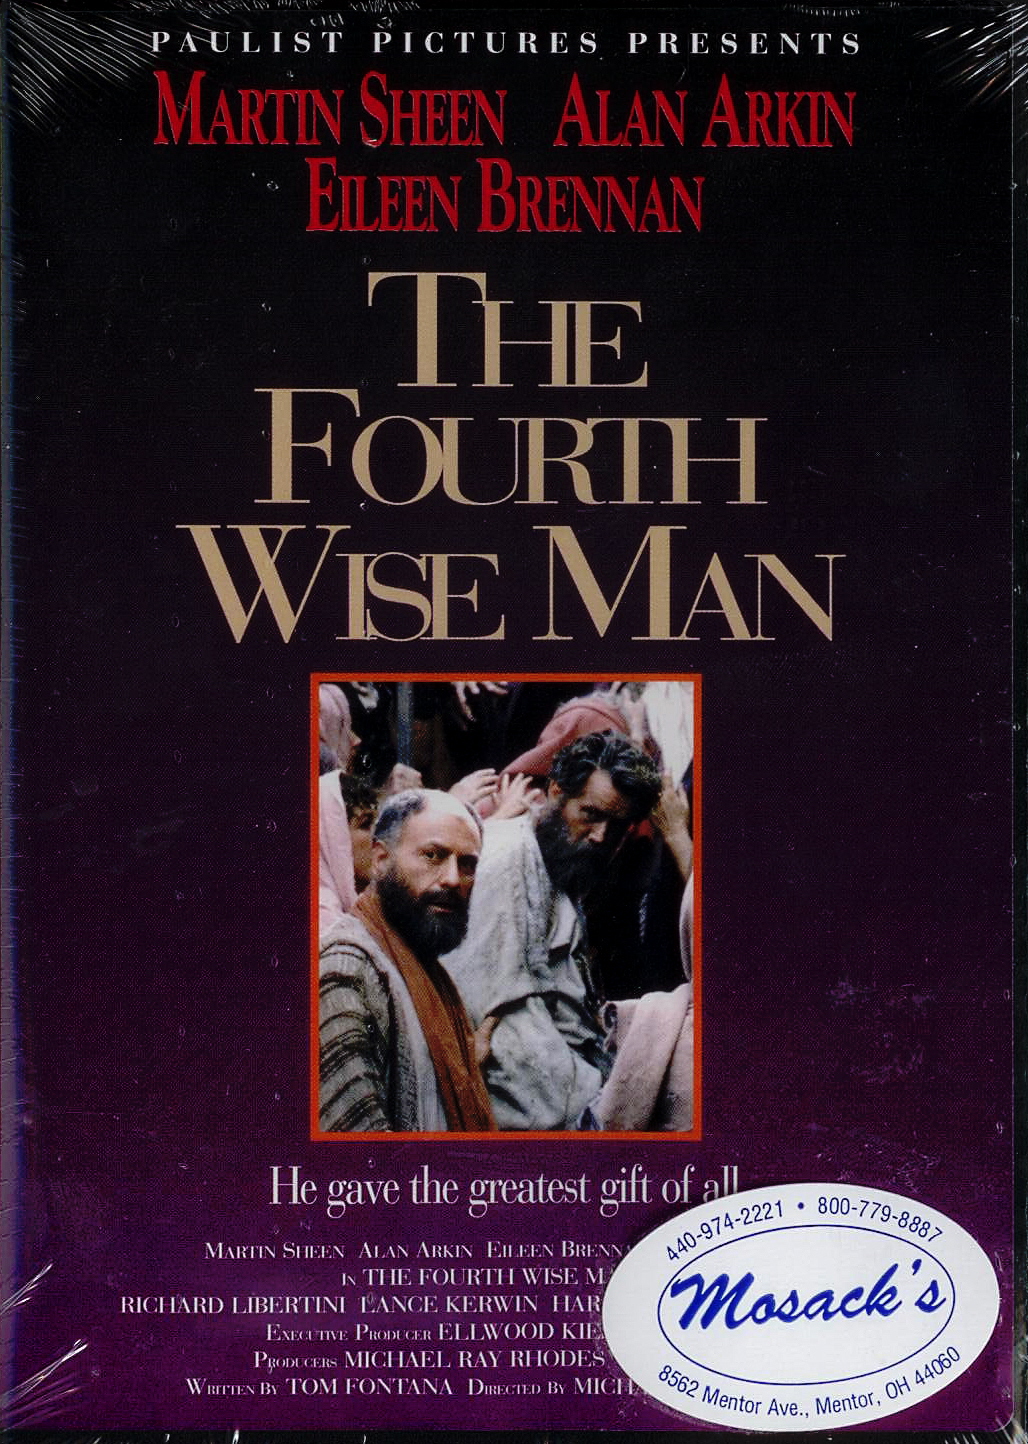 DVD-The Fourth Wise Man, Title; Michael Ray Rhodes, Director